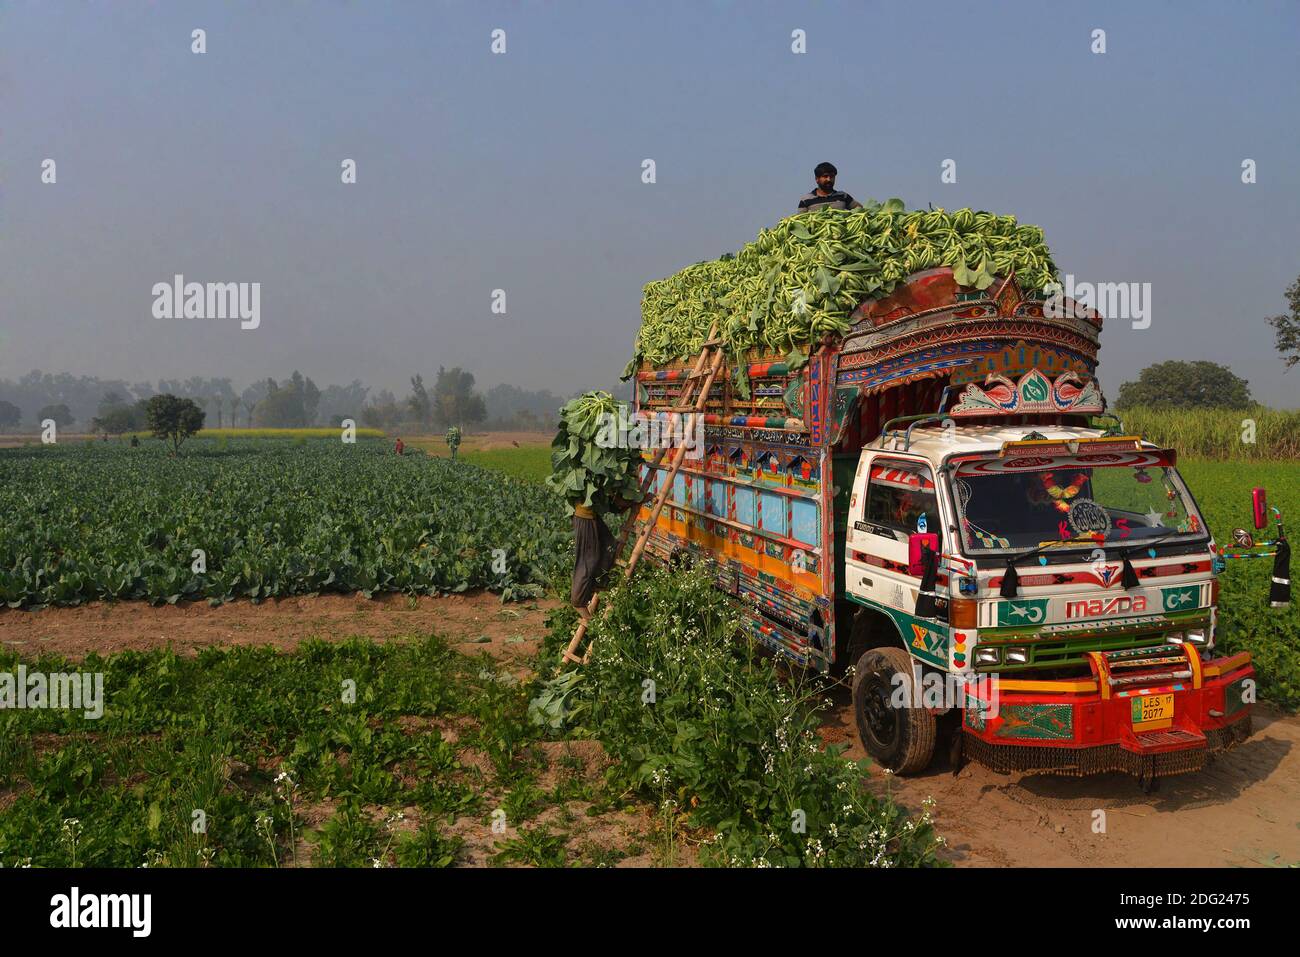 Pakistani farmars busy in their routine work at Cauliflower,s fileld and loading on truck subrub of lahore.(Photo by Rana Sajid Hussain) Stock Photo